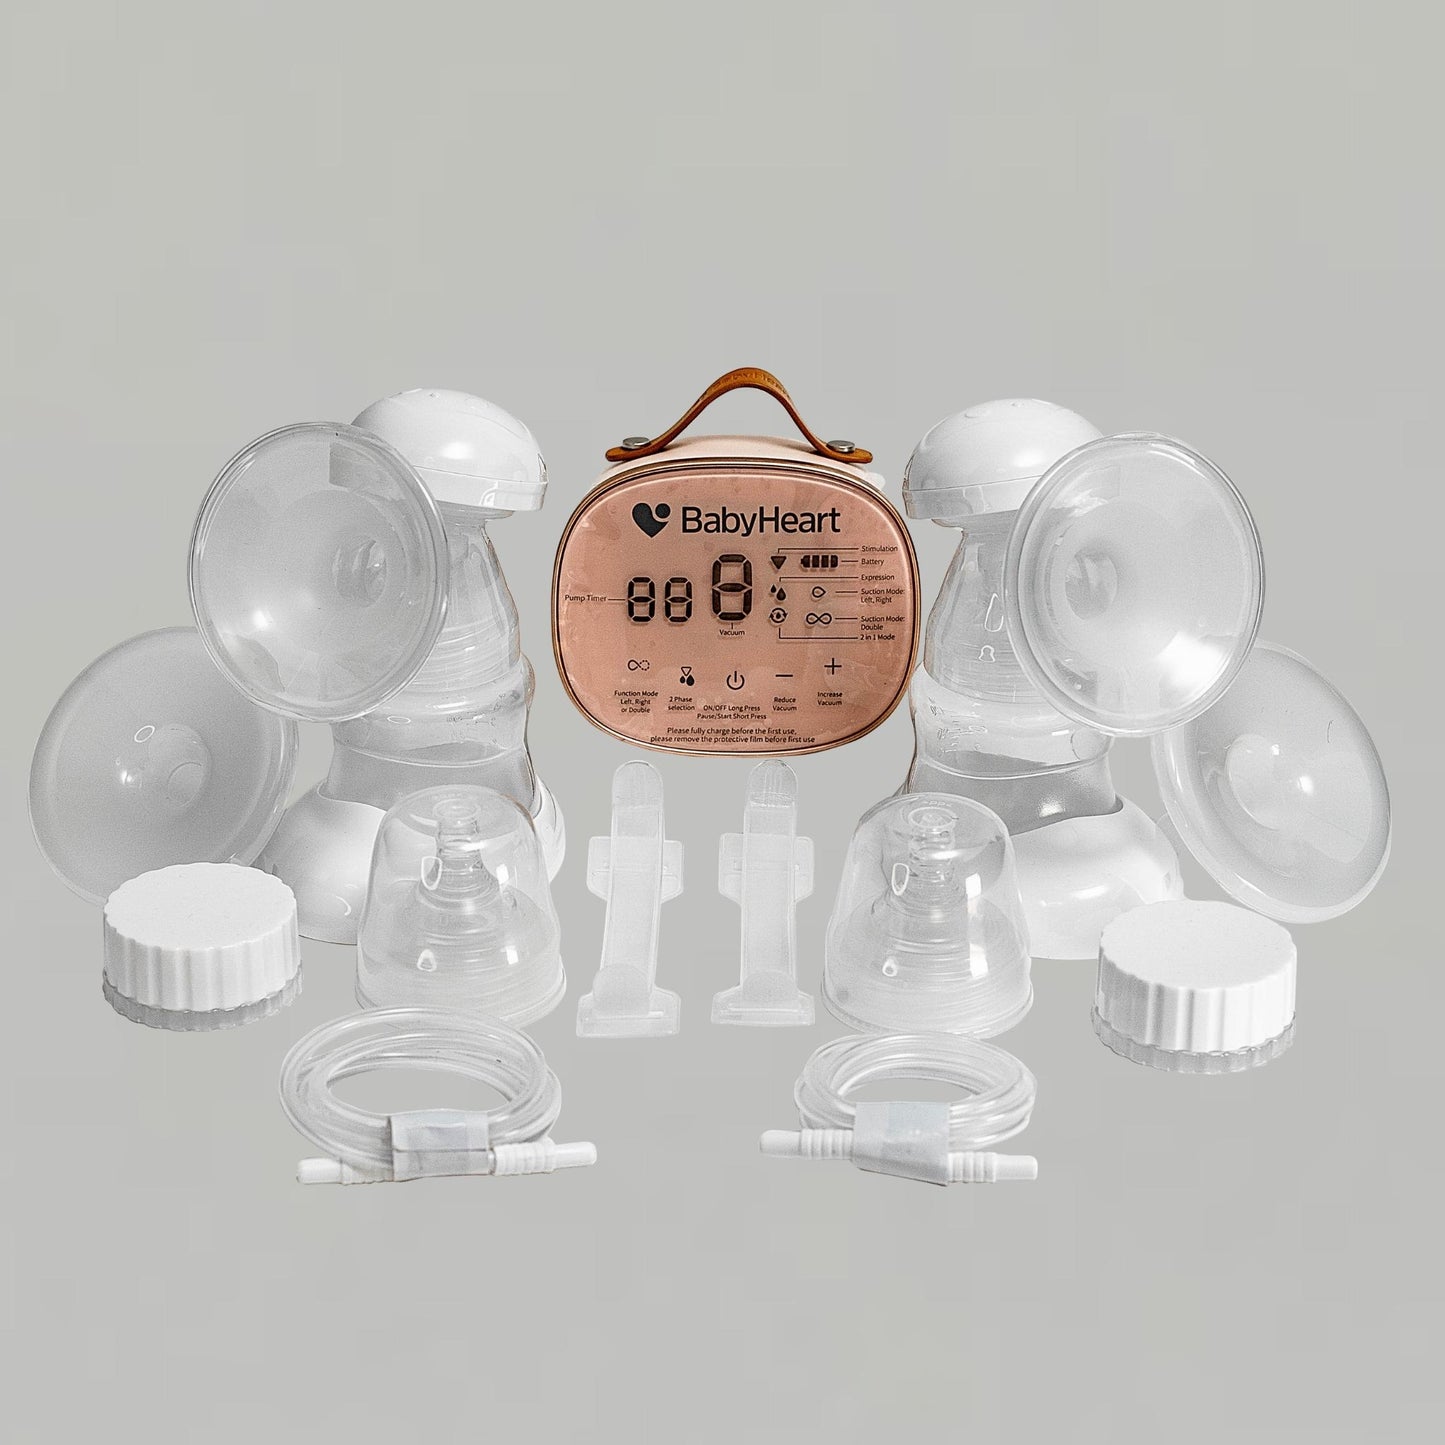 BabyHeart’s double electric breast pump all components